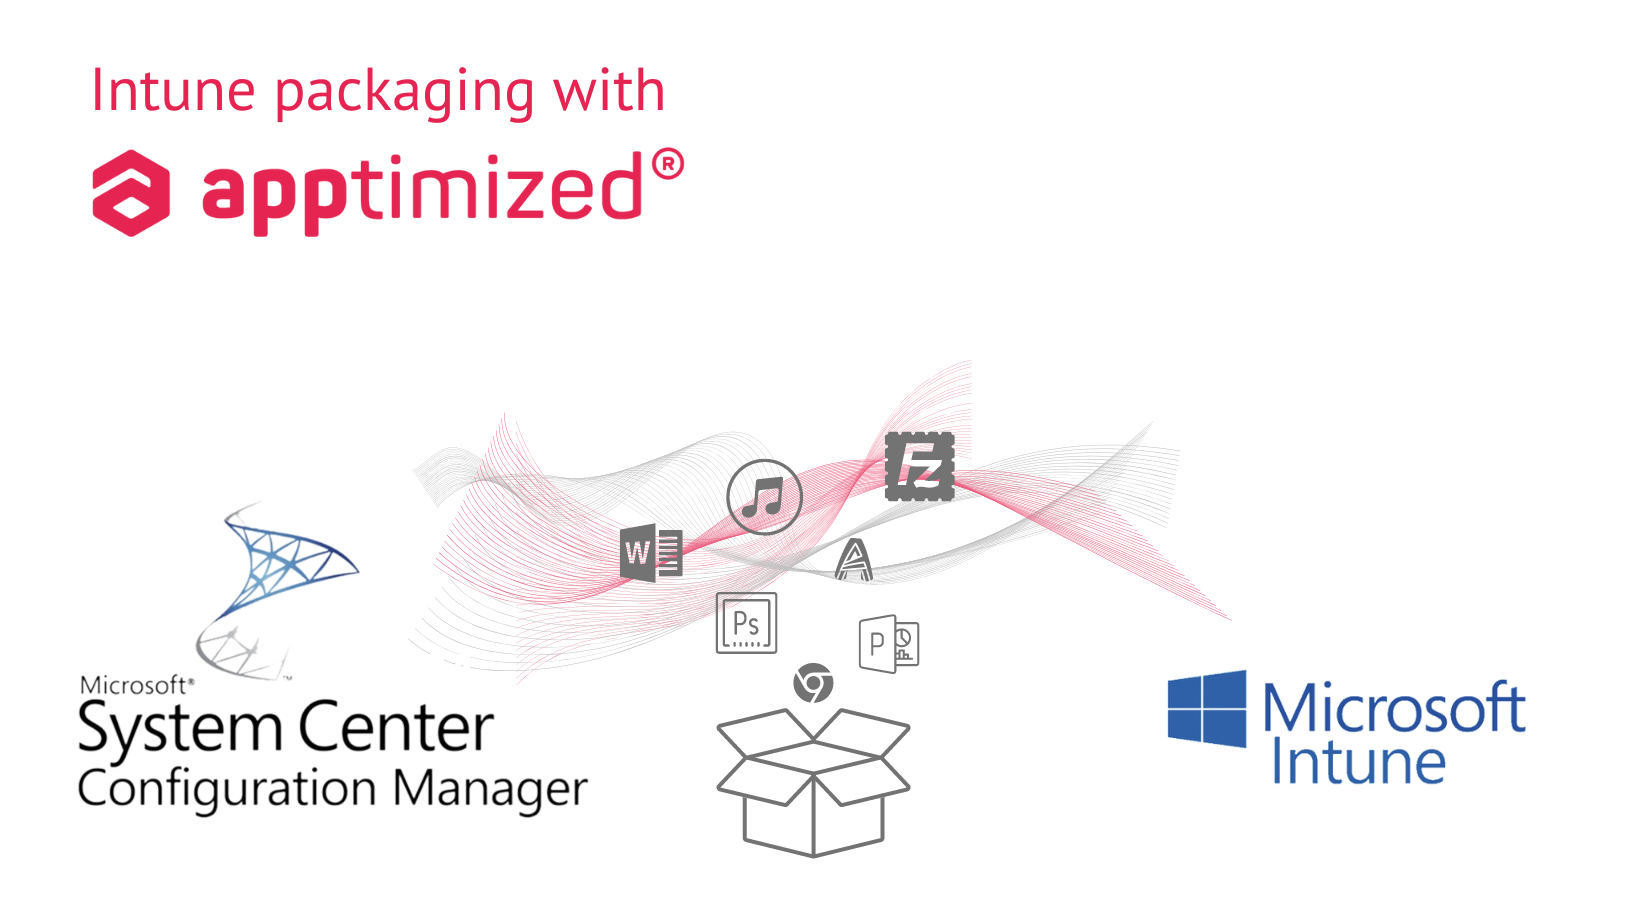 Intune packaging with Apptimized